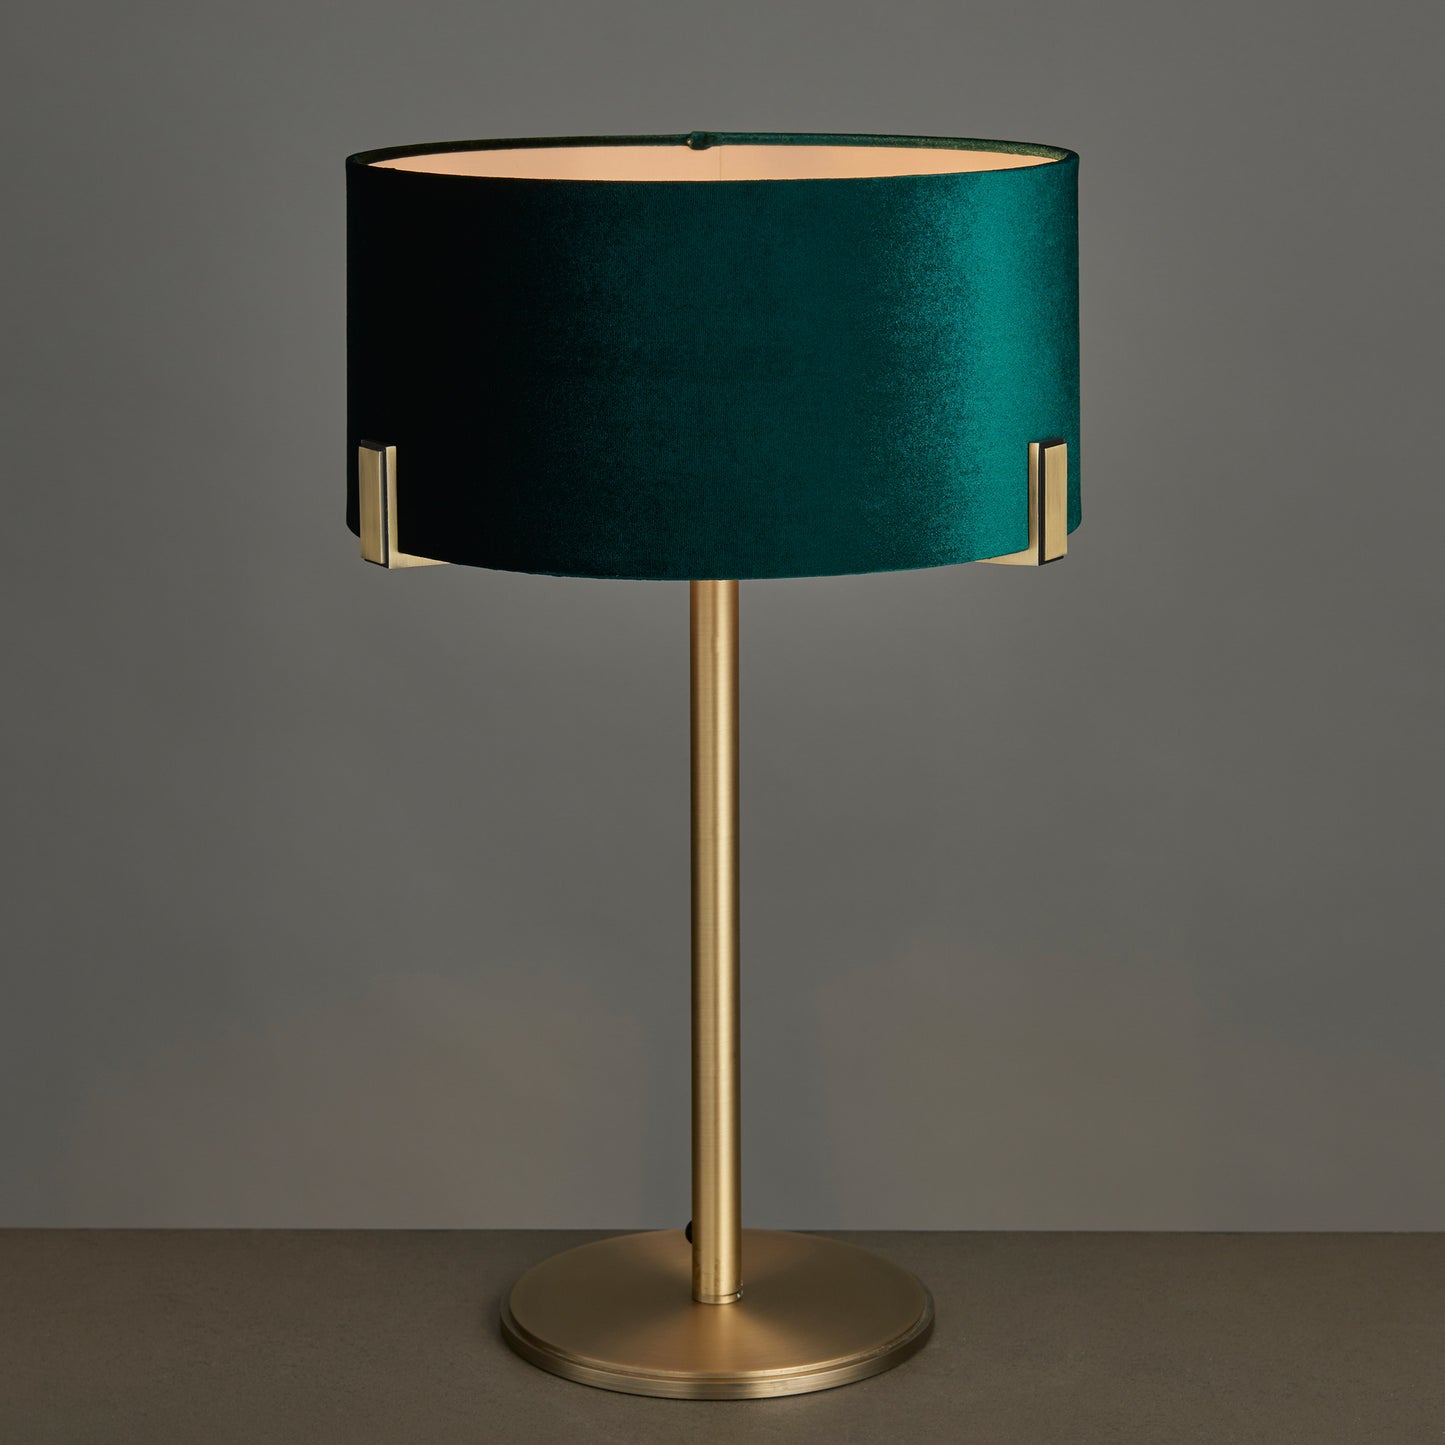 Hayfield Table Lamp Antique Brass with an emerald green shade for home interior decor.